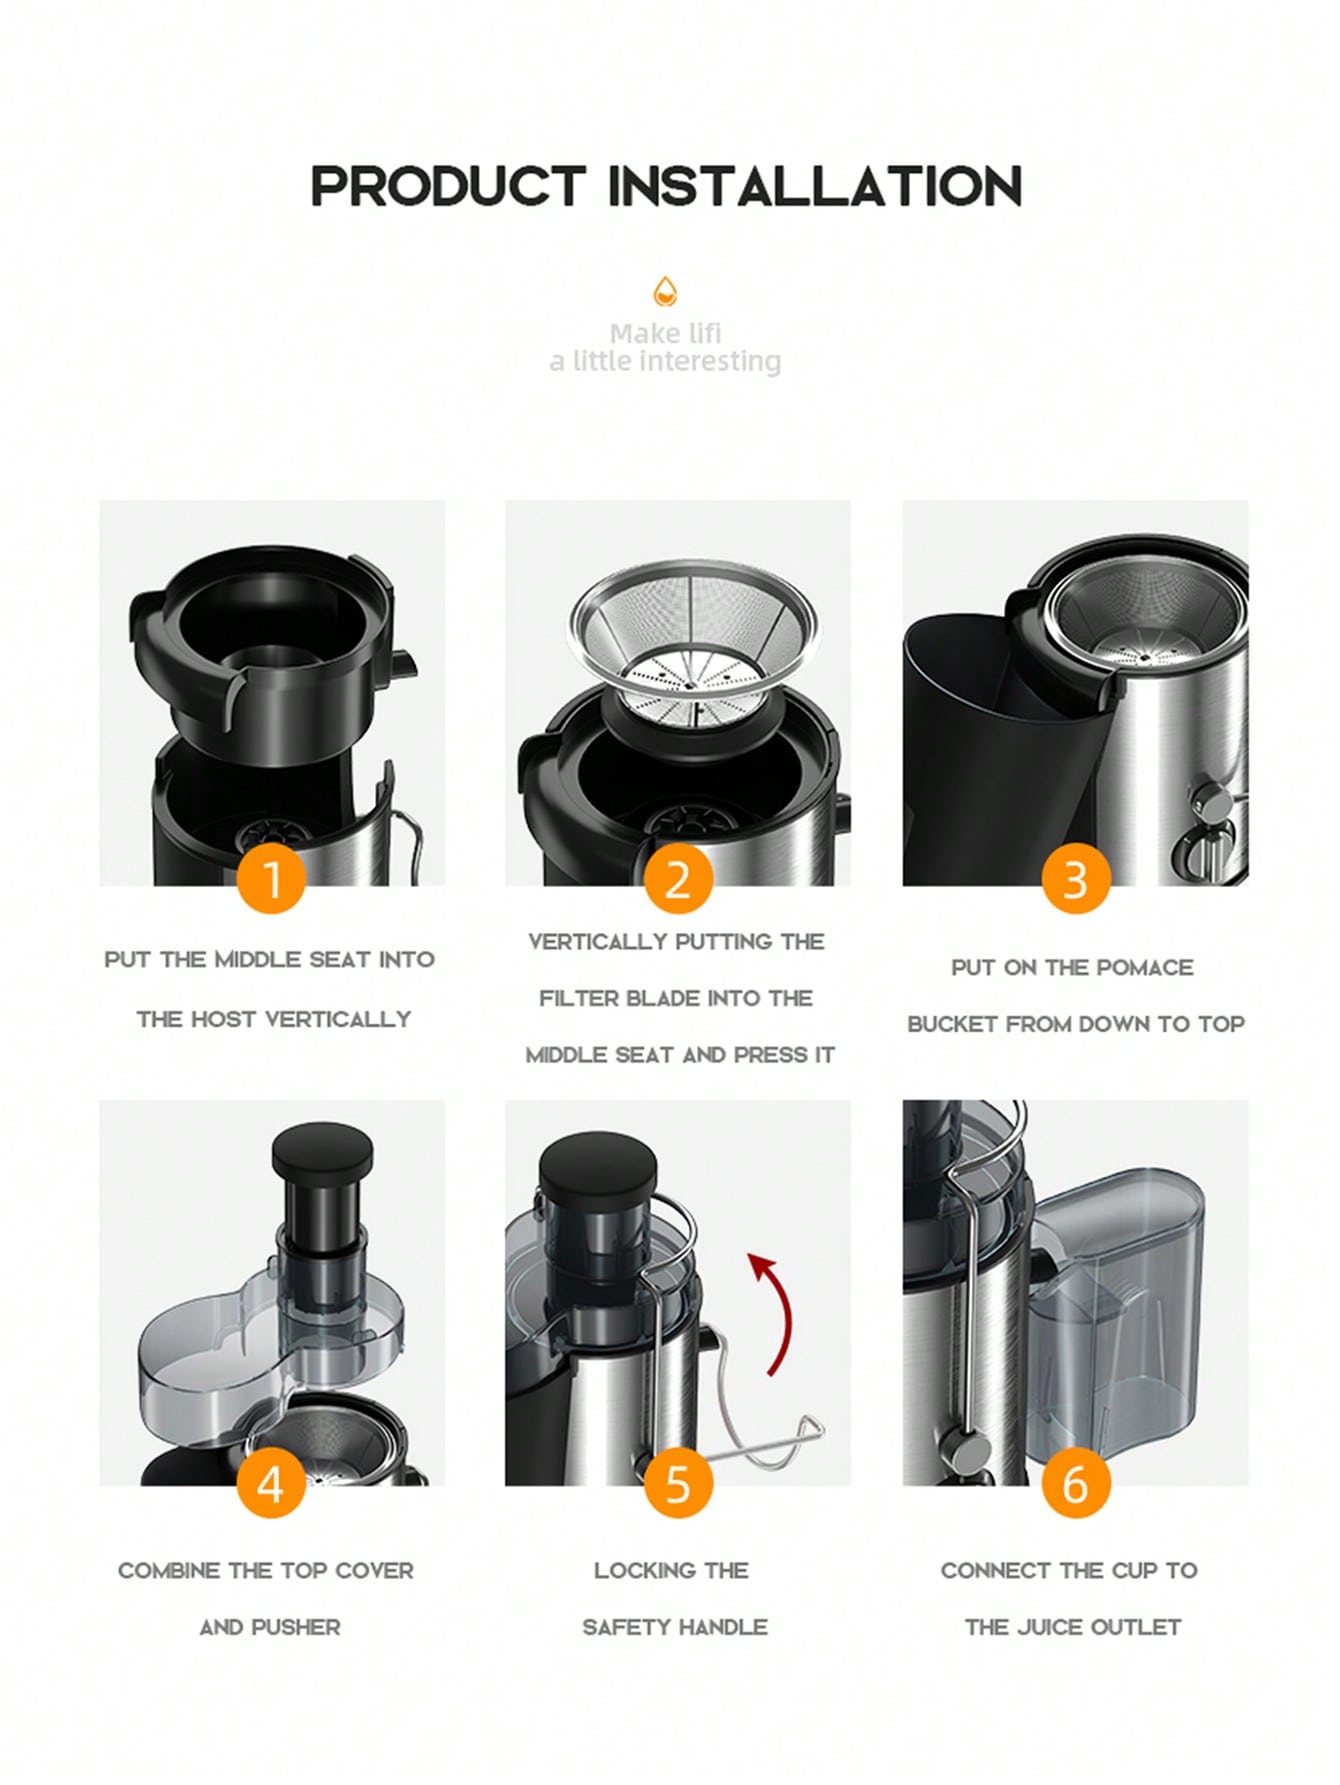 1pc Uk Standard Easy-clean Juicer, Pulp Separation Design, 400w High Power, 65cm Wide Feeder Chute, 450ml Juice Cup, Free Cleaning Brush Included--10